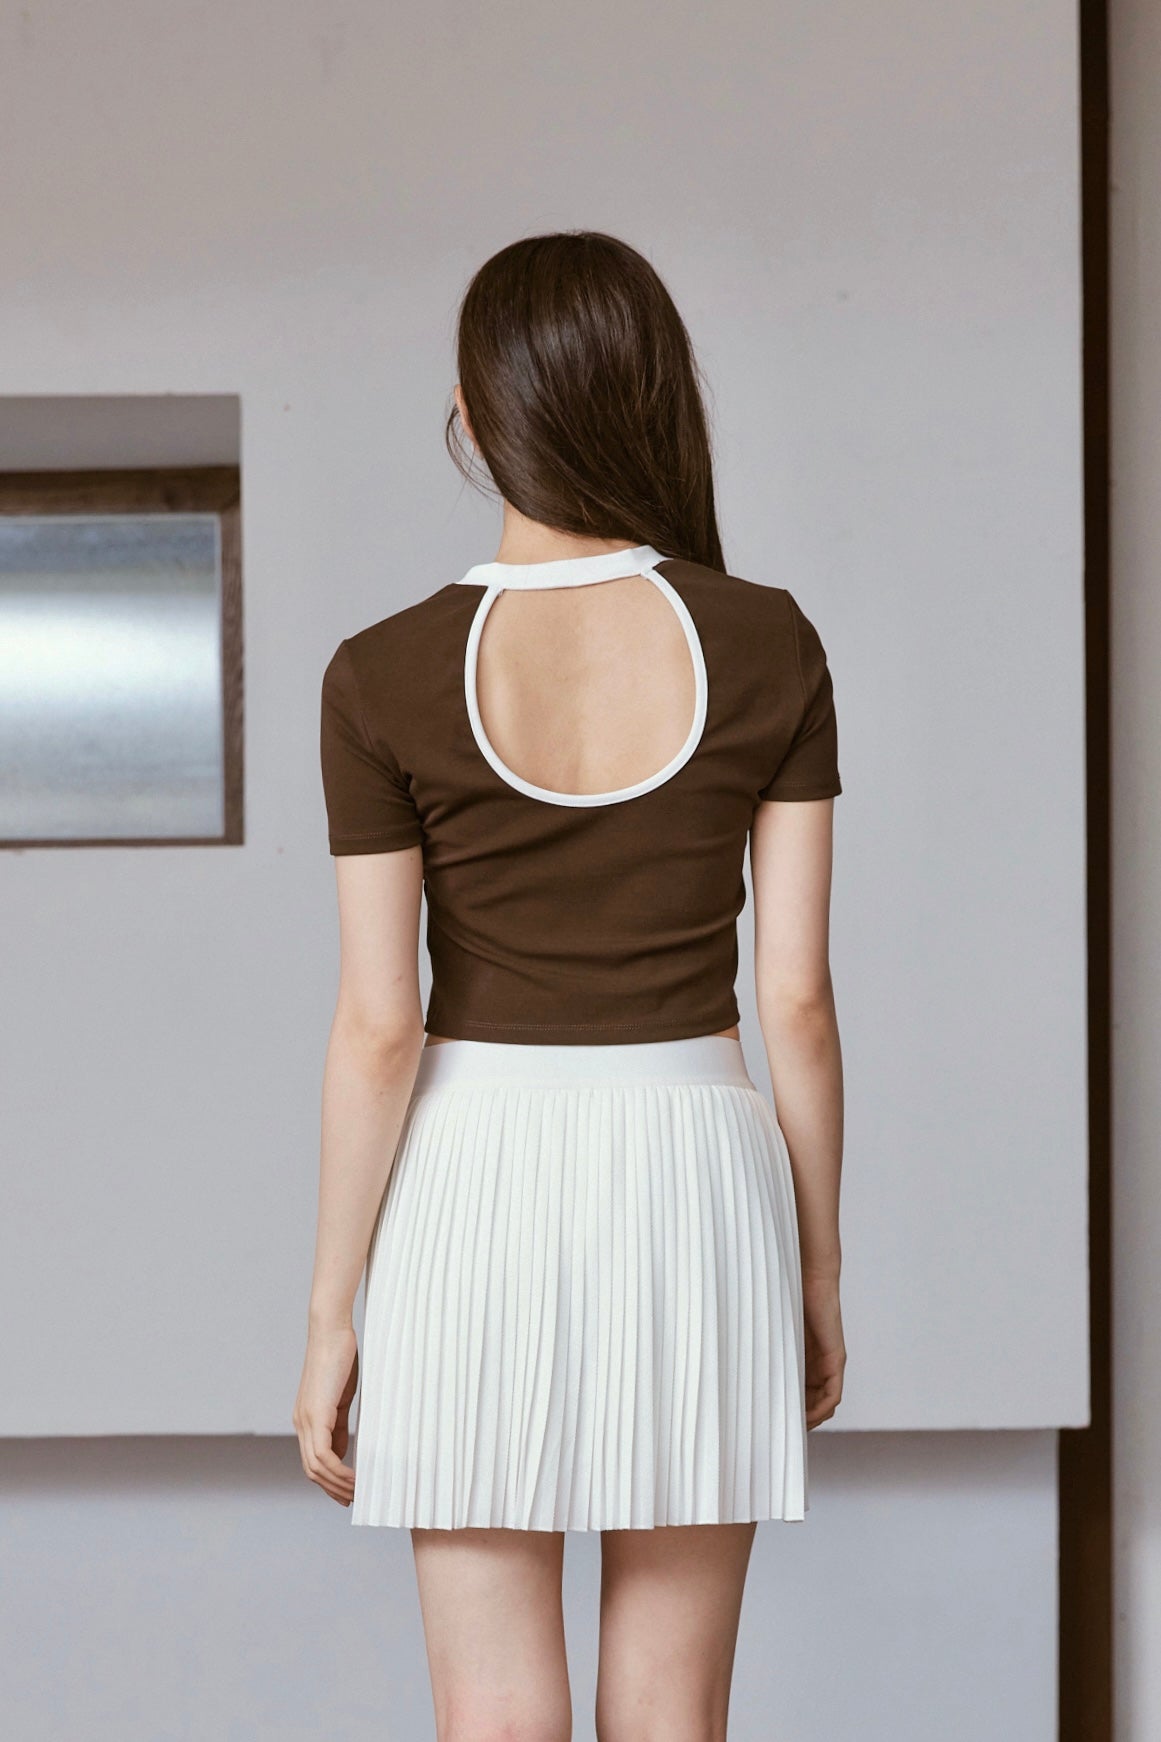 Retro Future Cropped Jersey Top - Brown